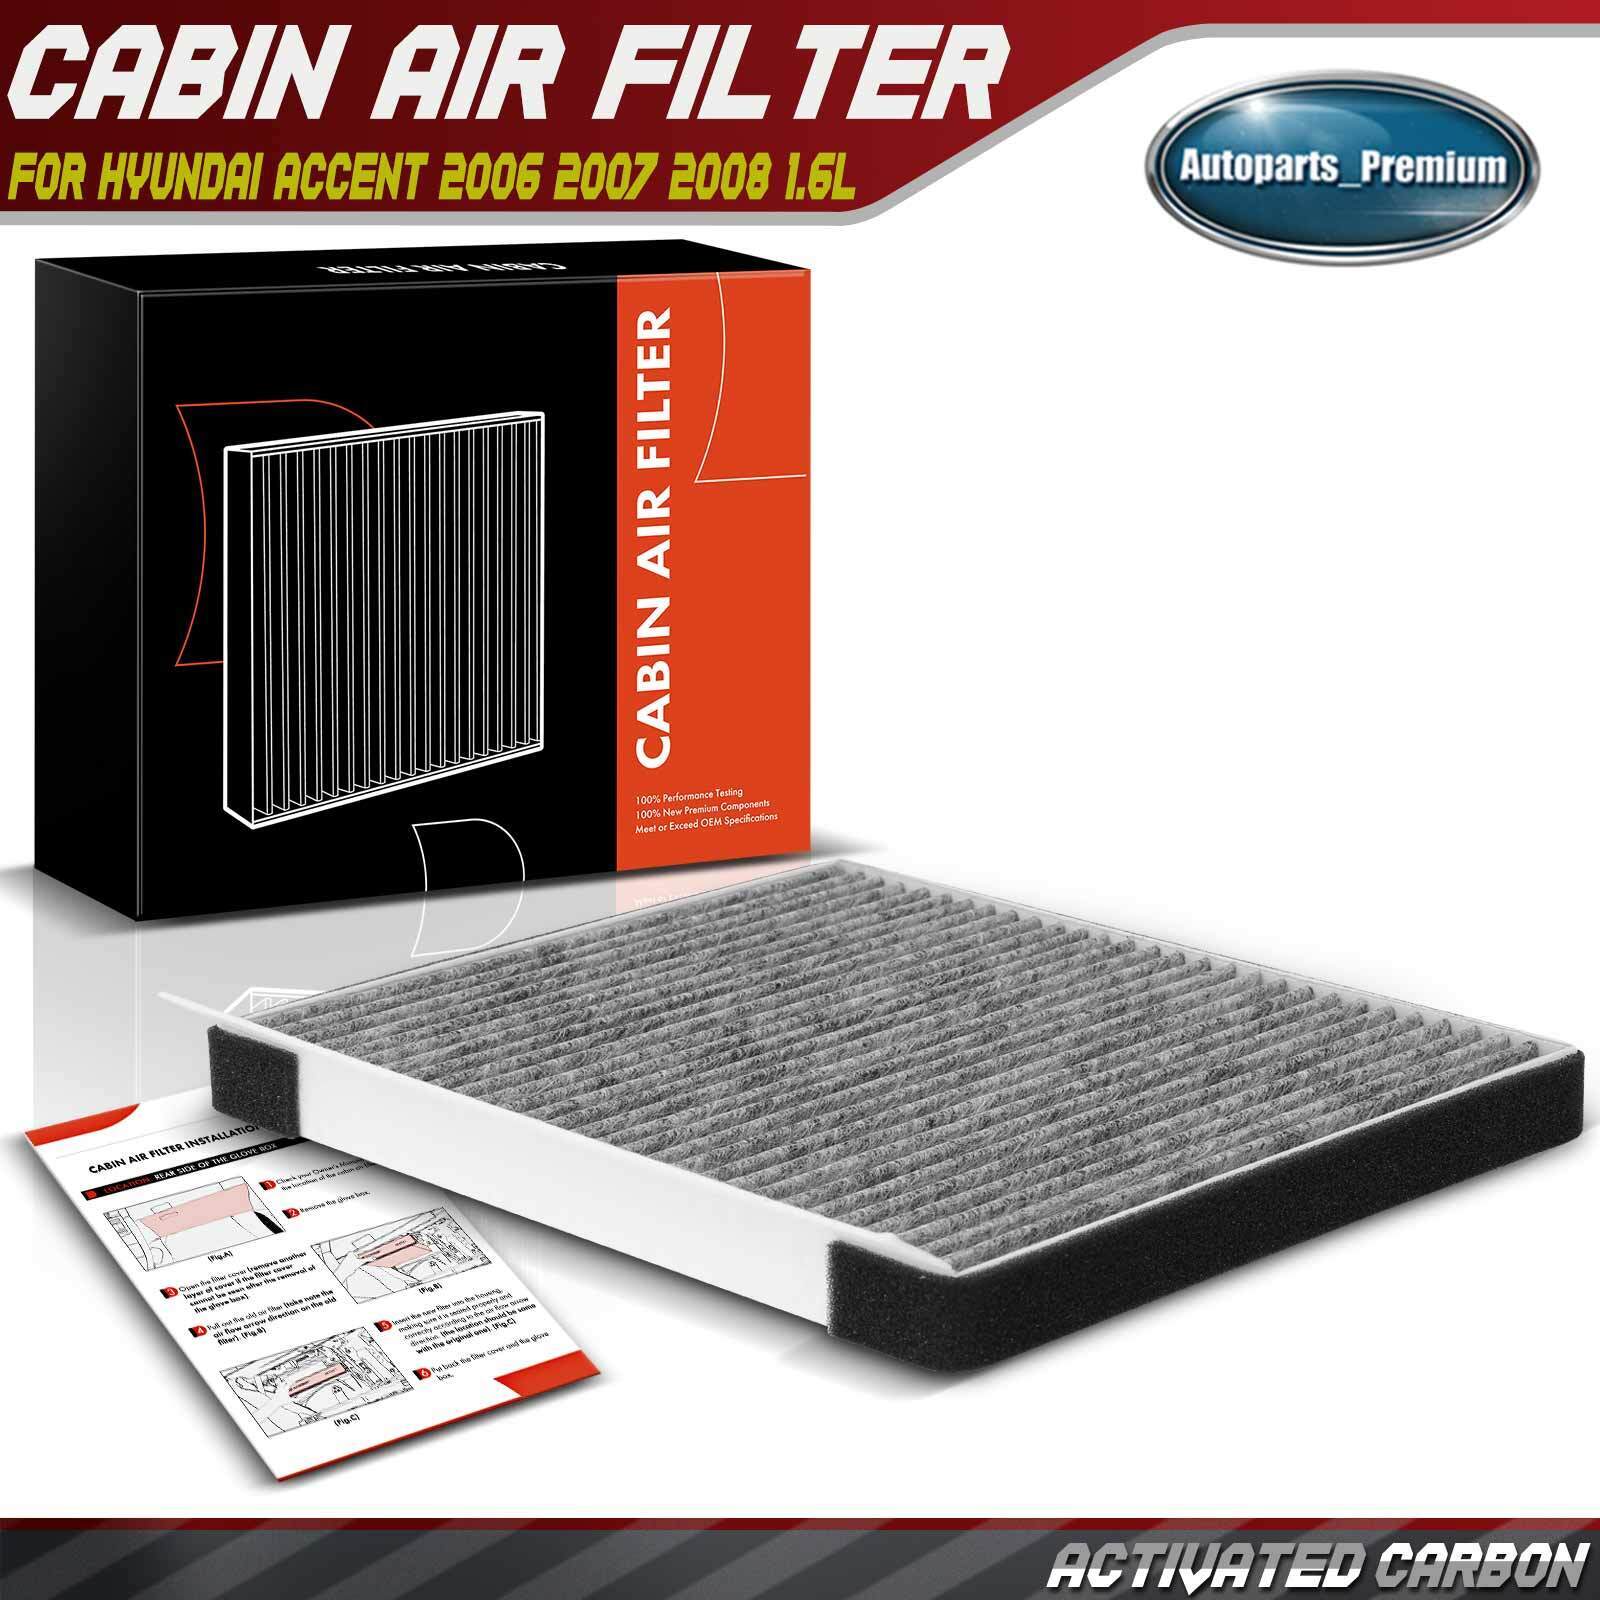 Cabin Air Filter with Activated Carbon for Hyundai Accent 2006 2007 2008 L4 1.6L